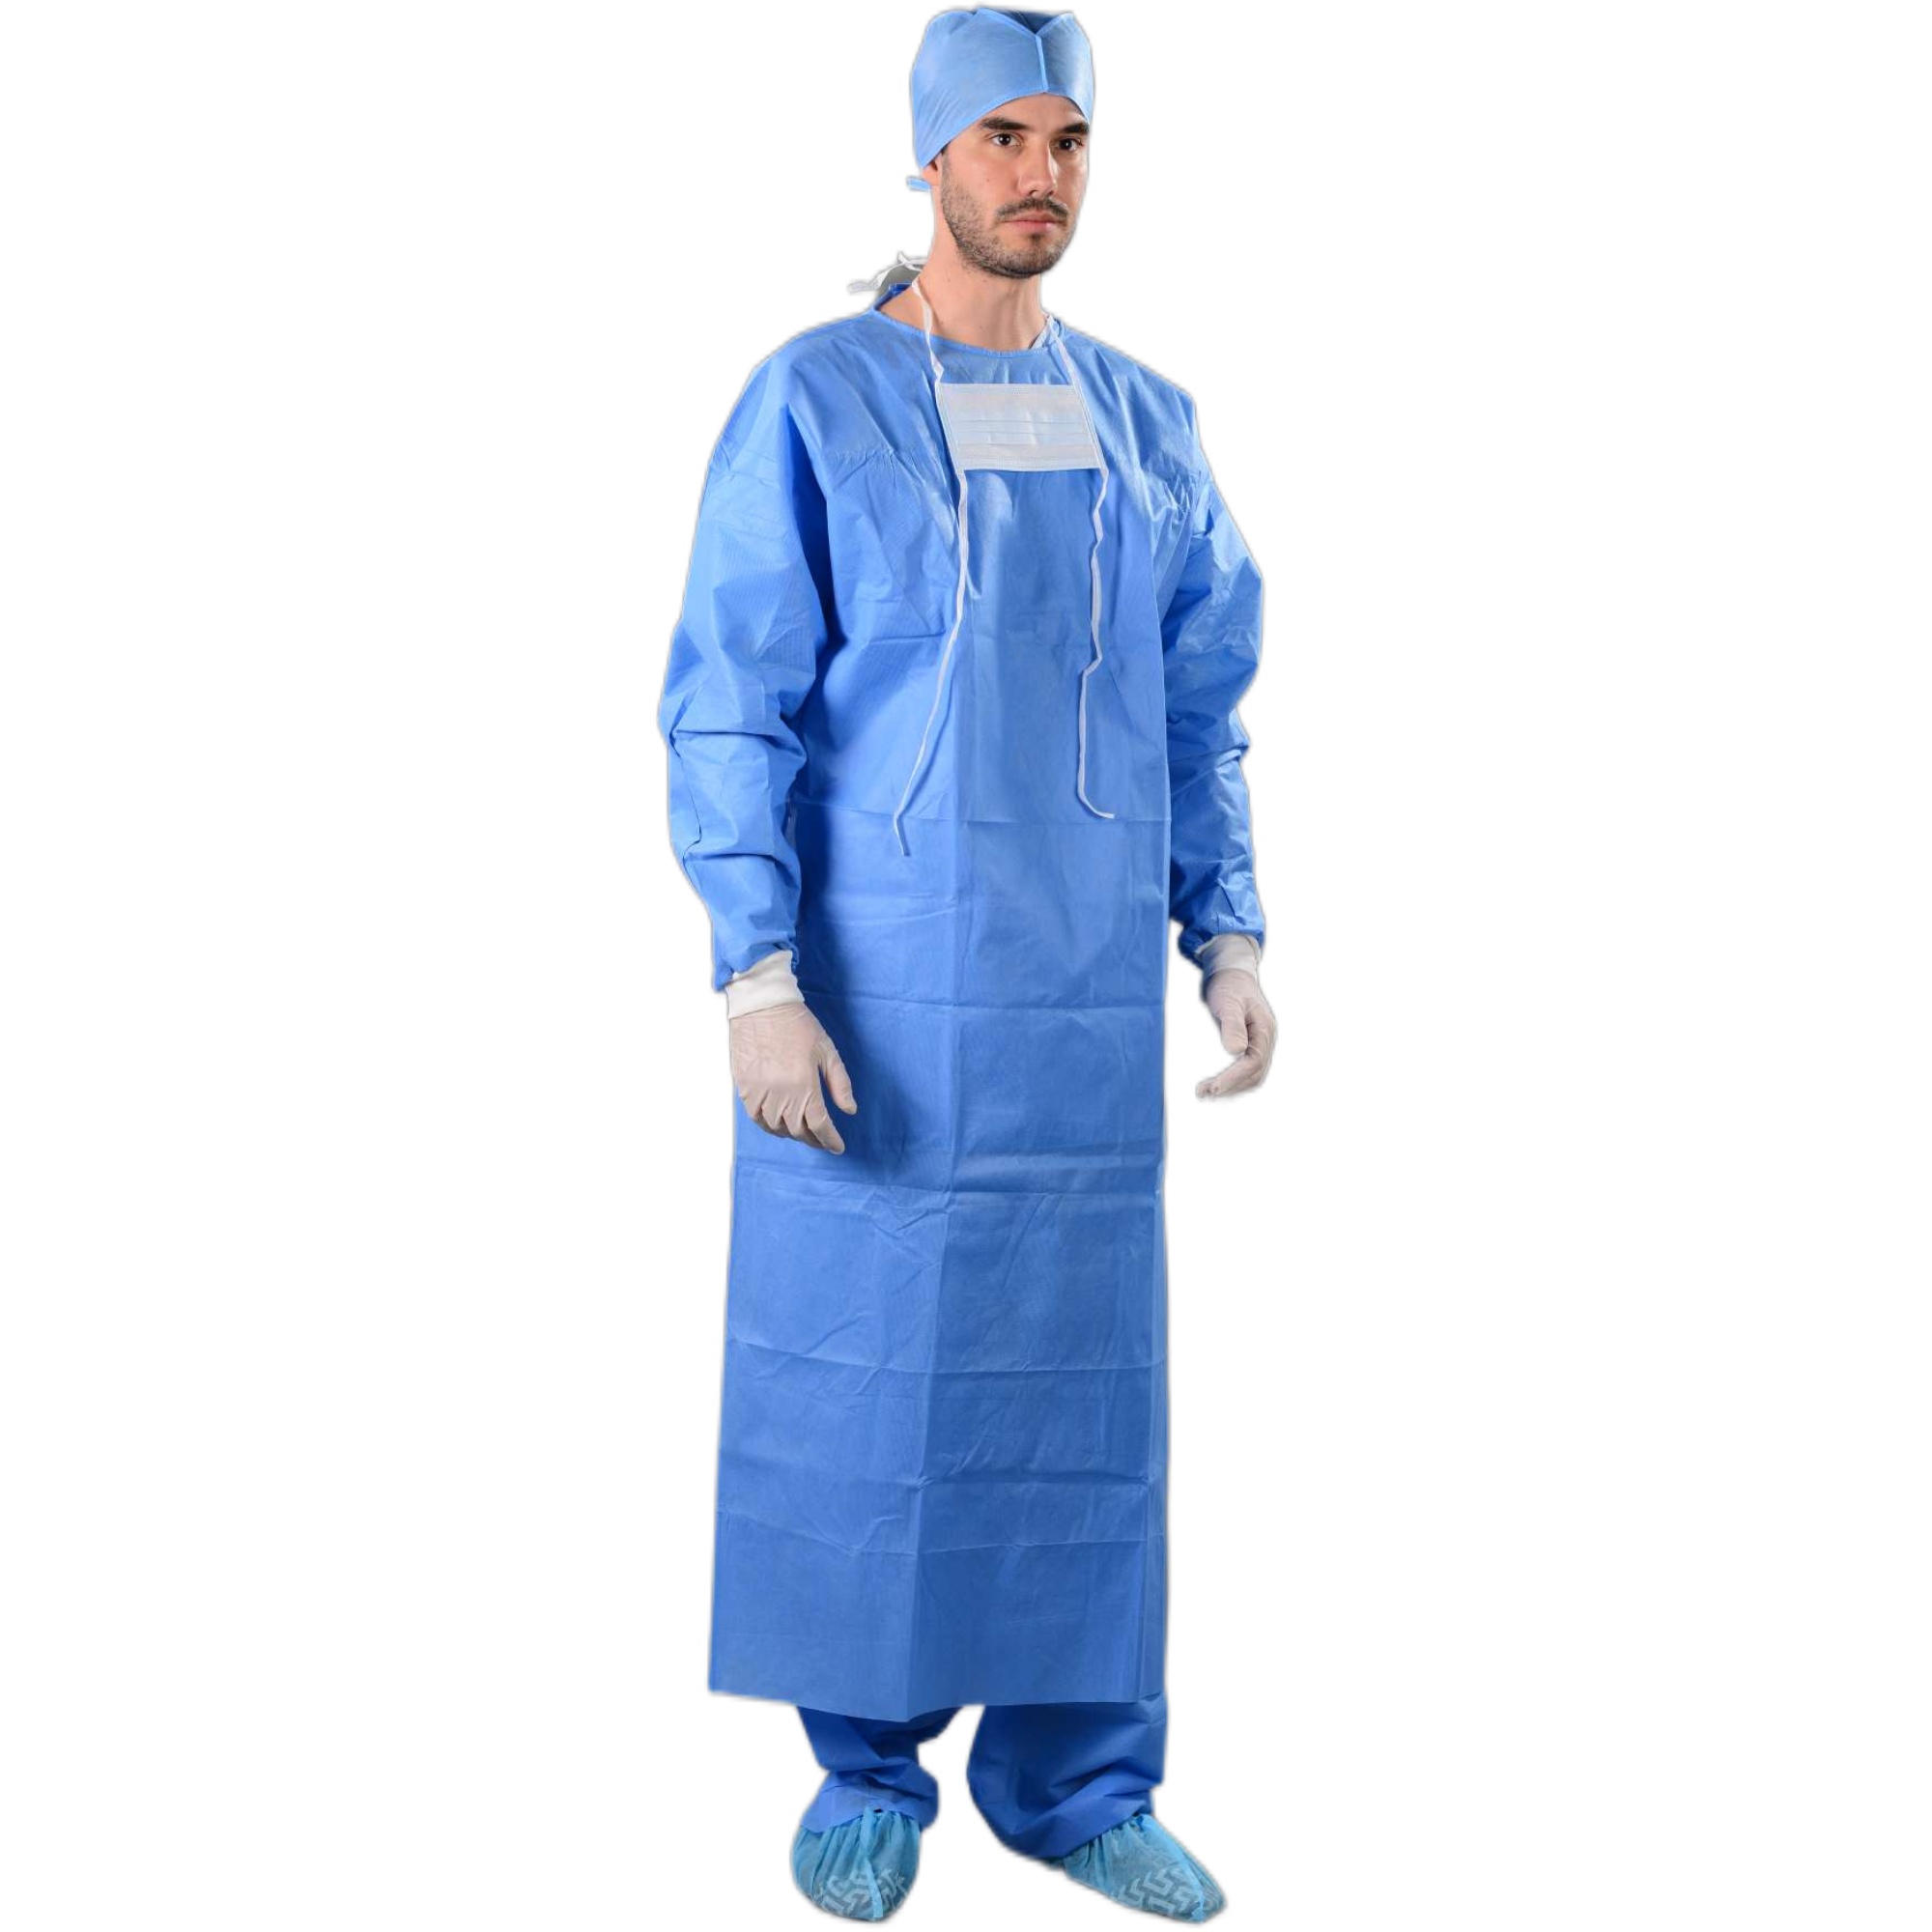 Ppe Waterproof Non Woven Level1 Sms Protective Surgery Medical Surgical Isolation Gowns Level 2 Cuffs 45GSM